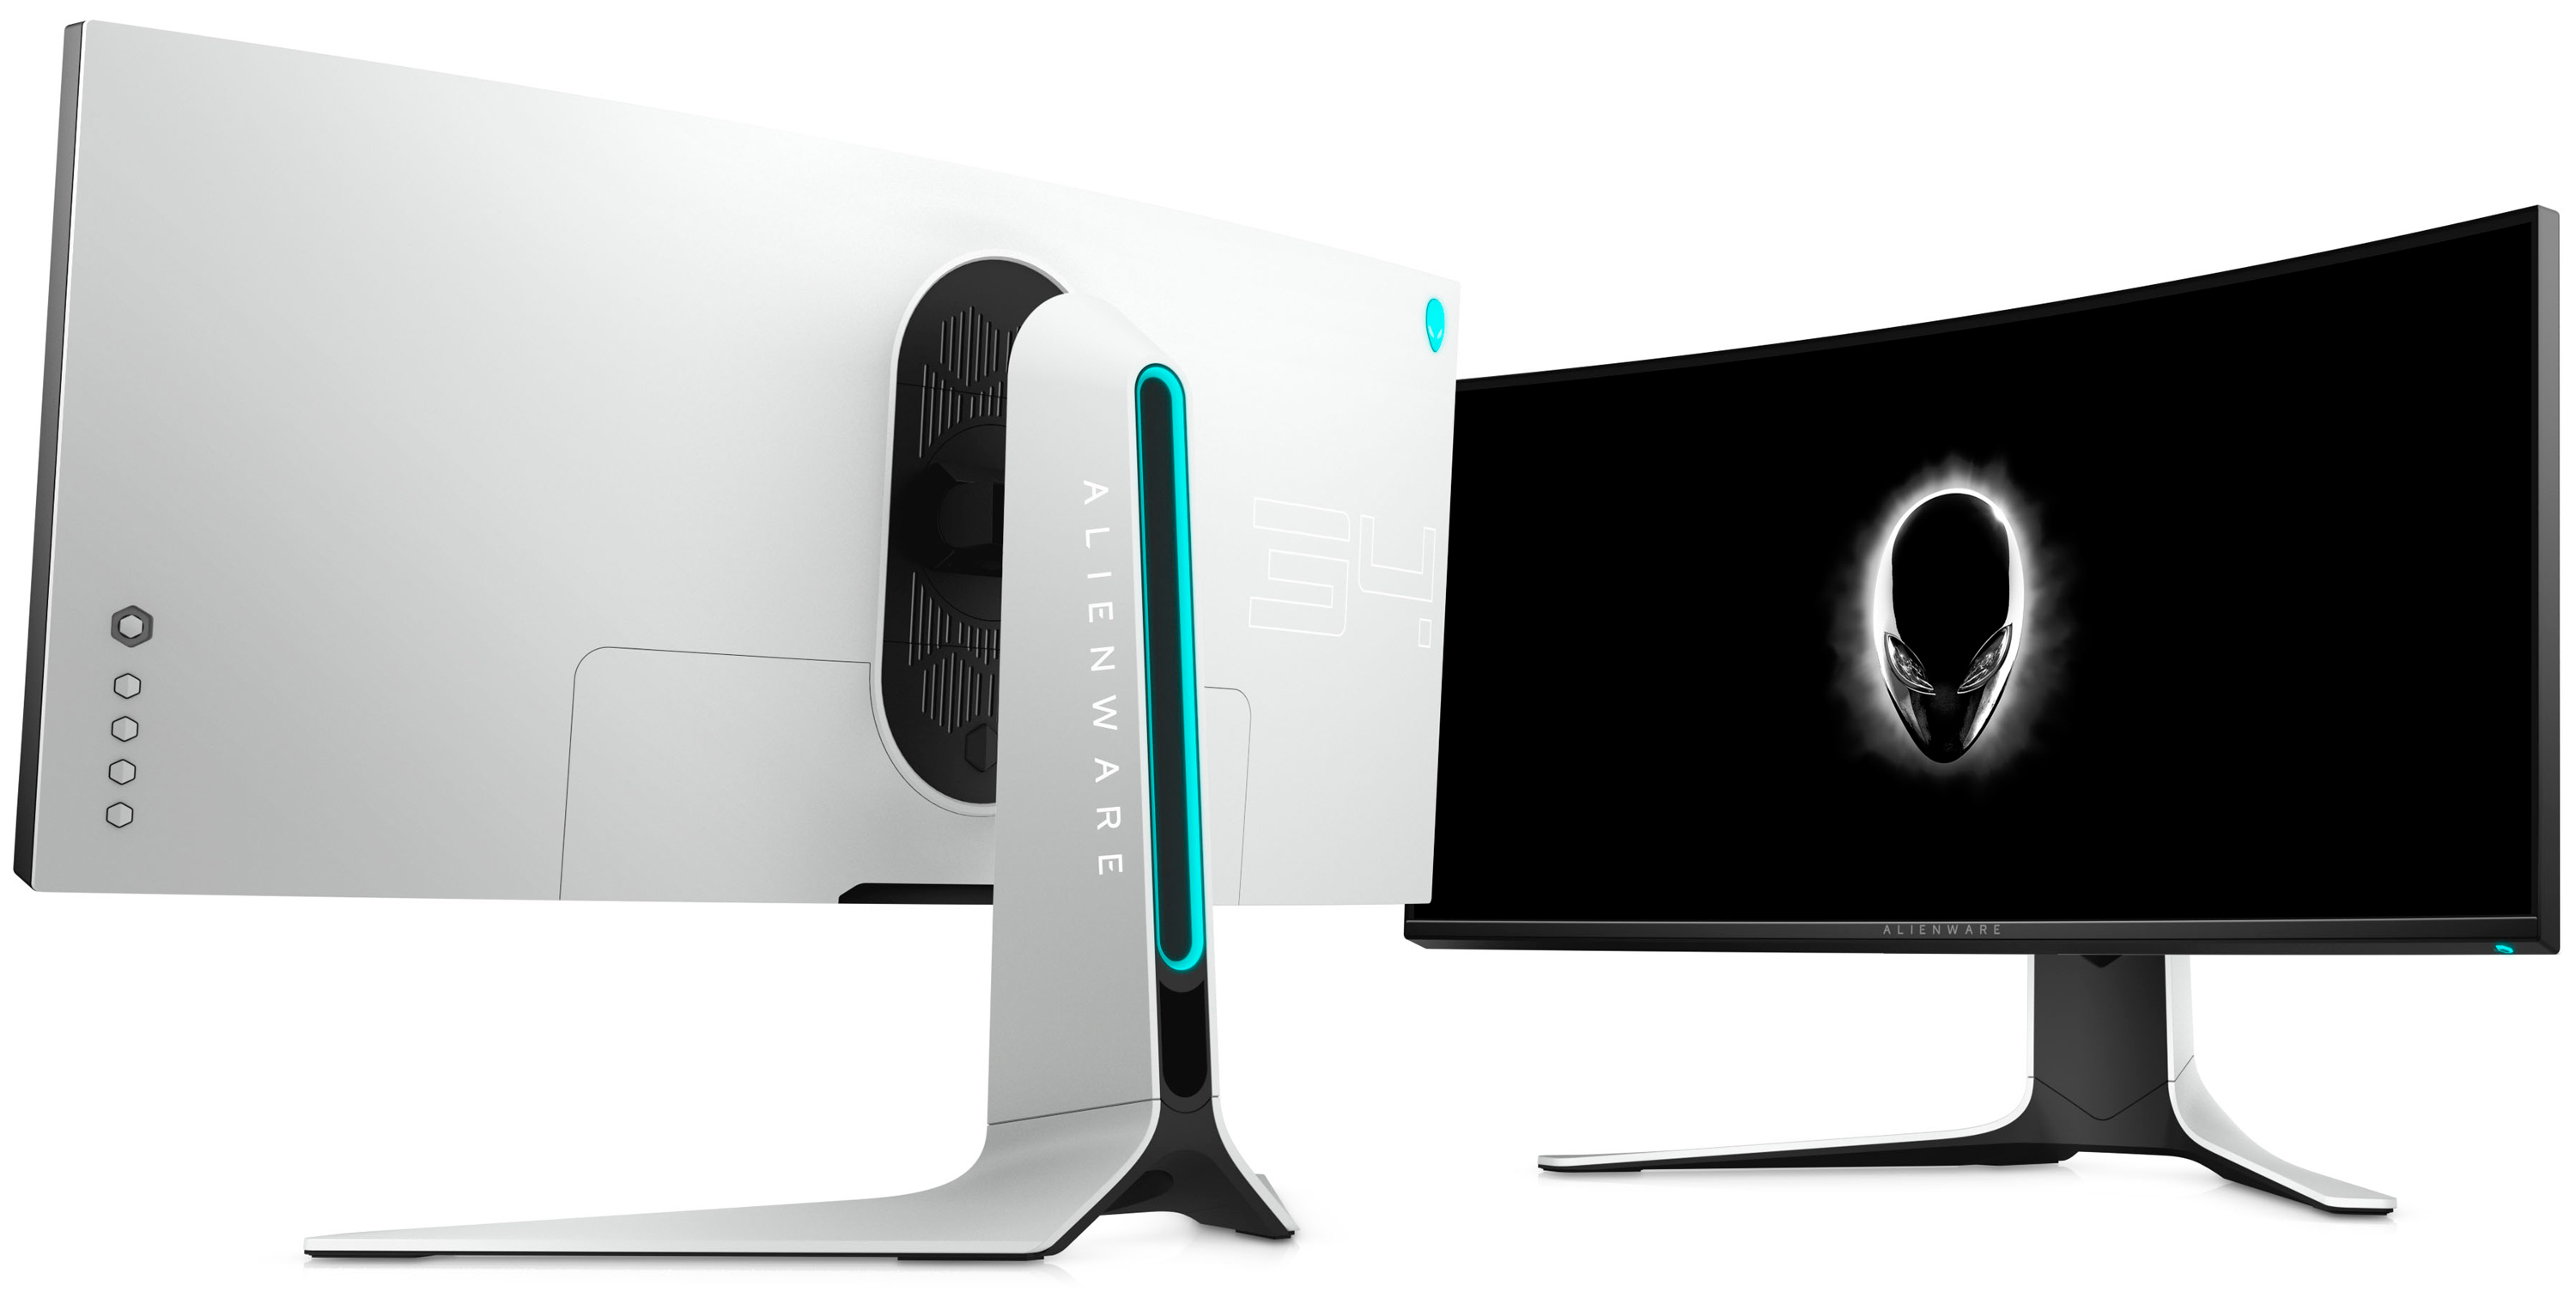 Dell Reveals Alienware 34 Curved Monitor: WQHD IPS with 120Hz G-Sync